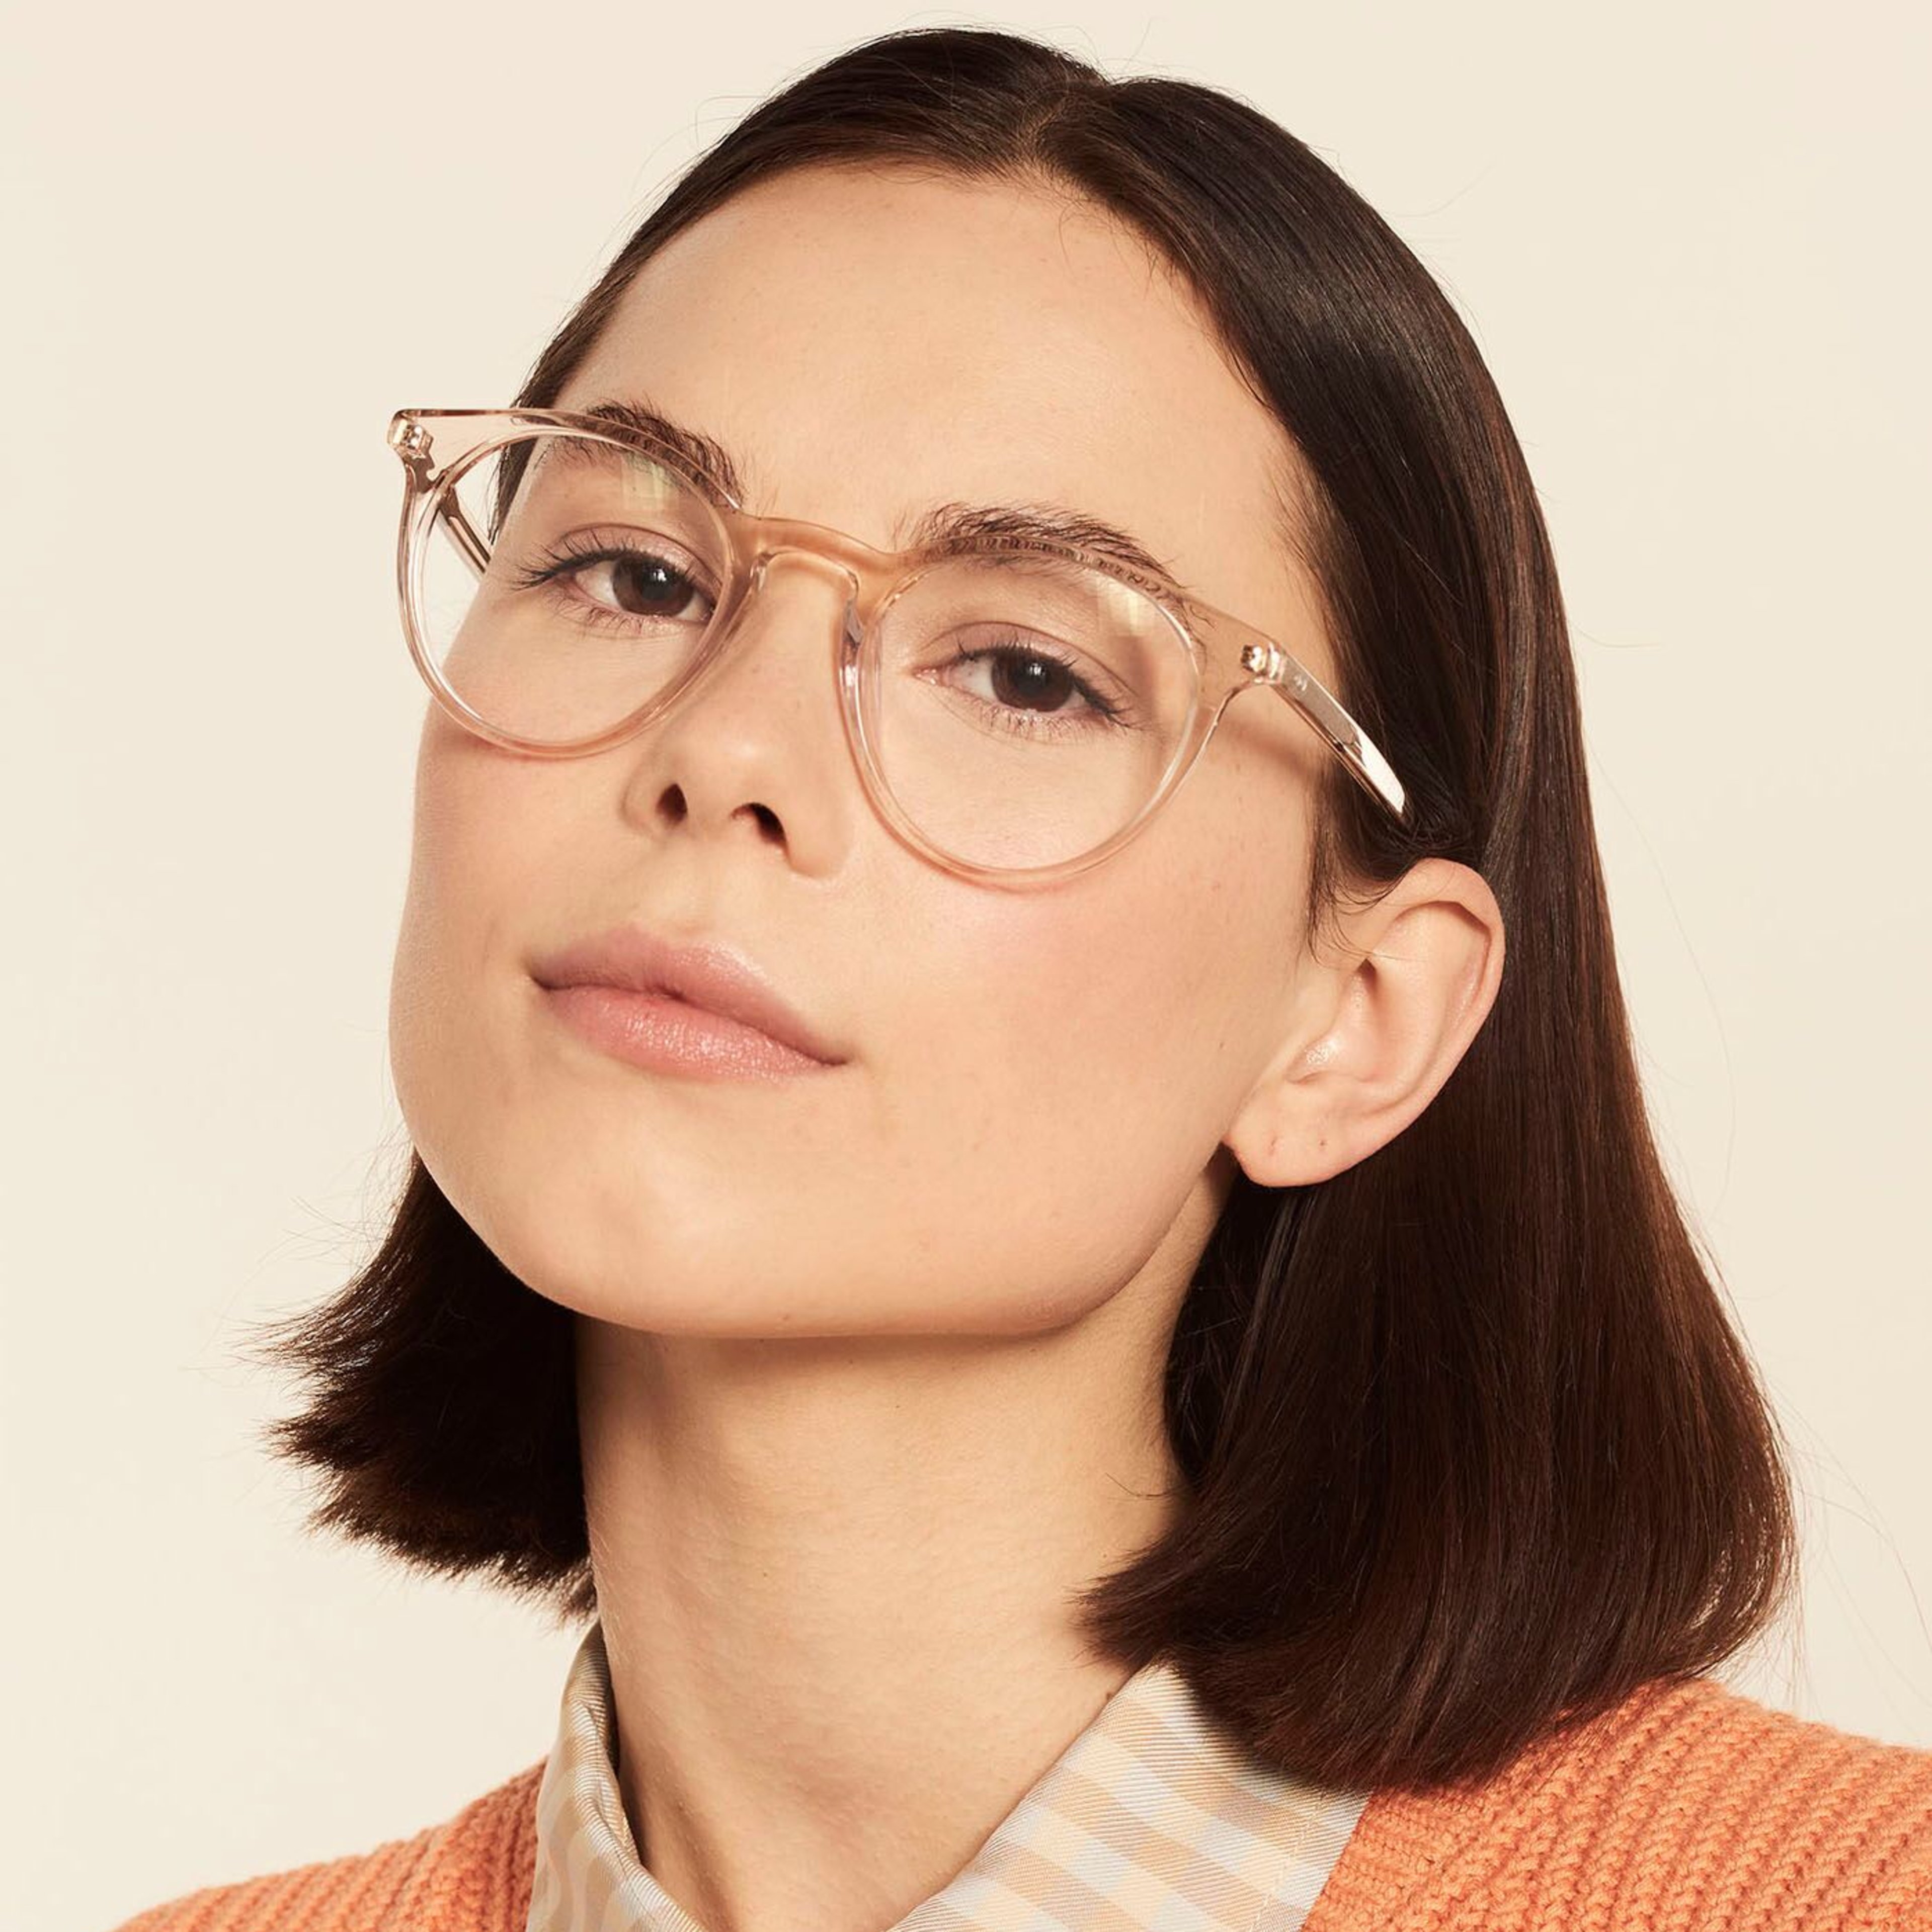 Ace & Tate Glasses | round acetate in Clear, Grey